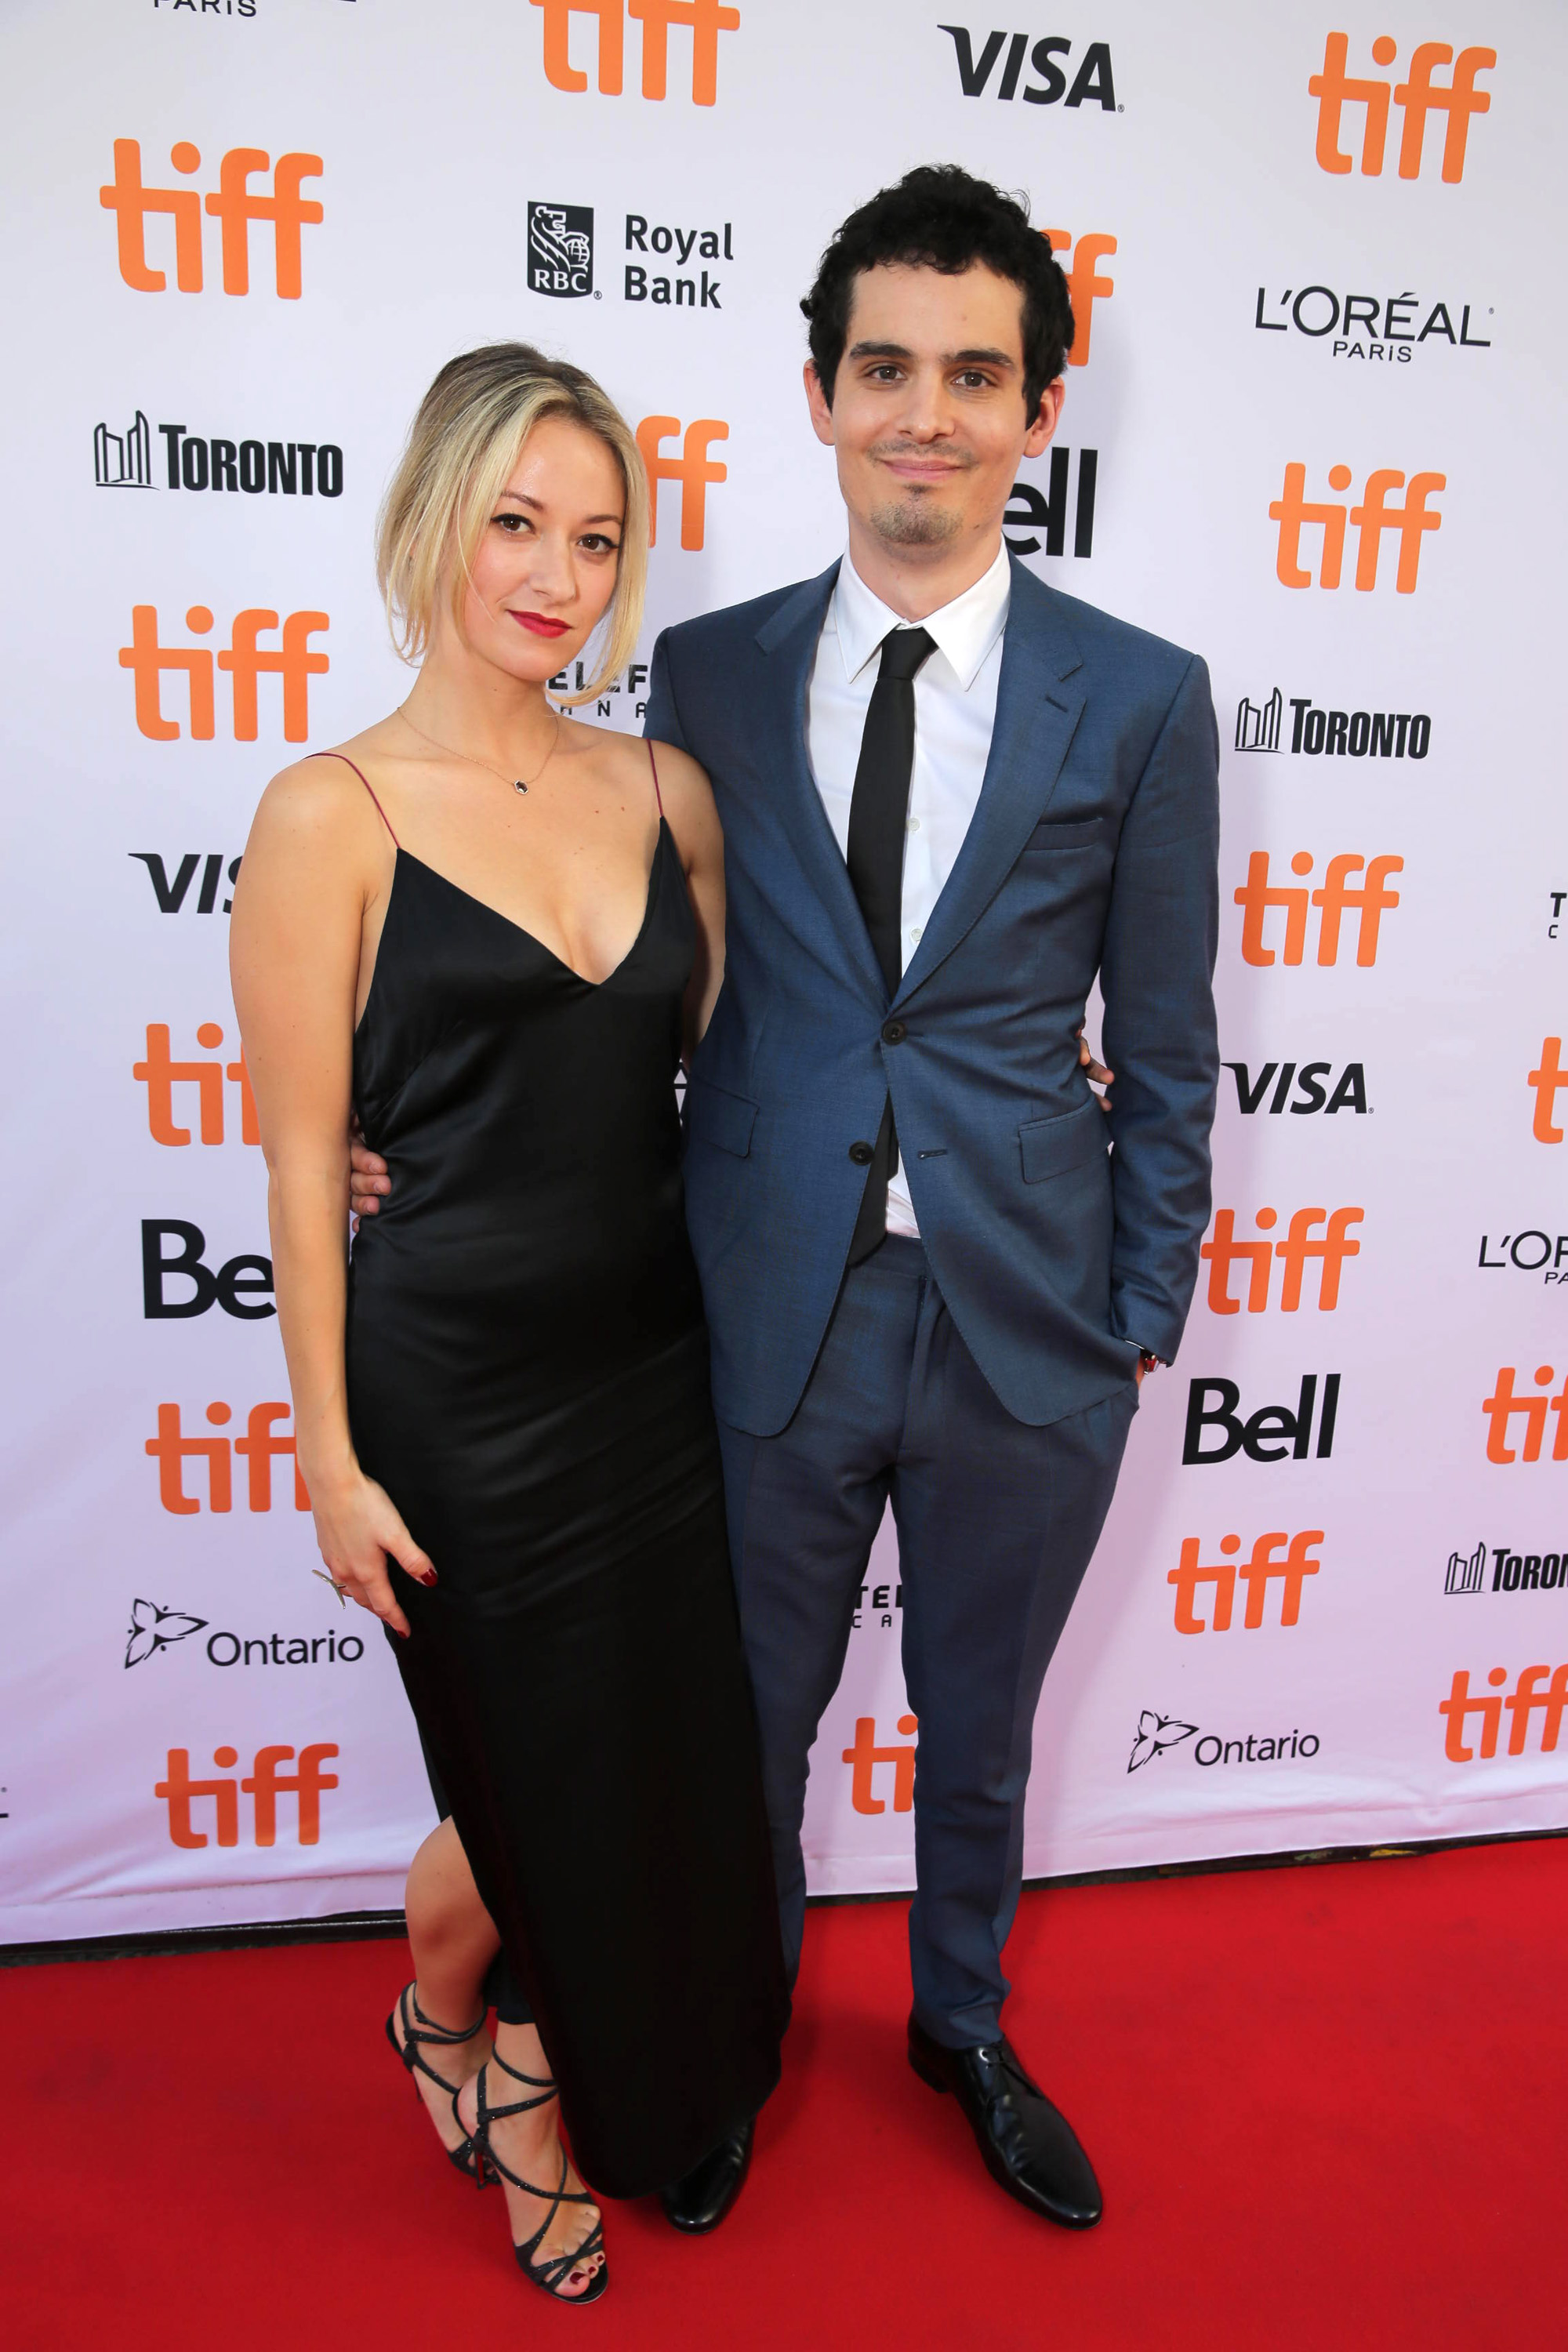 Olivia Hamilton and Writer/Director Damien Chazelle seen at Summit Entertainment's "La La Land" premiere at the 2016 Toronto International Film Festival on Monday, Sept. 12, 2016, in Toronto. (Photo by Eric Charbonneau/Invision for LionsgateAP Images)